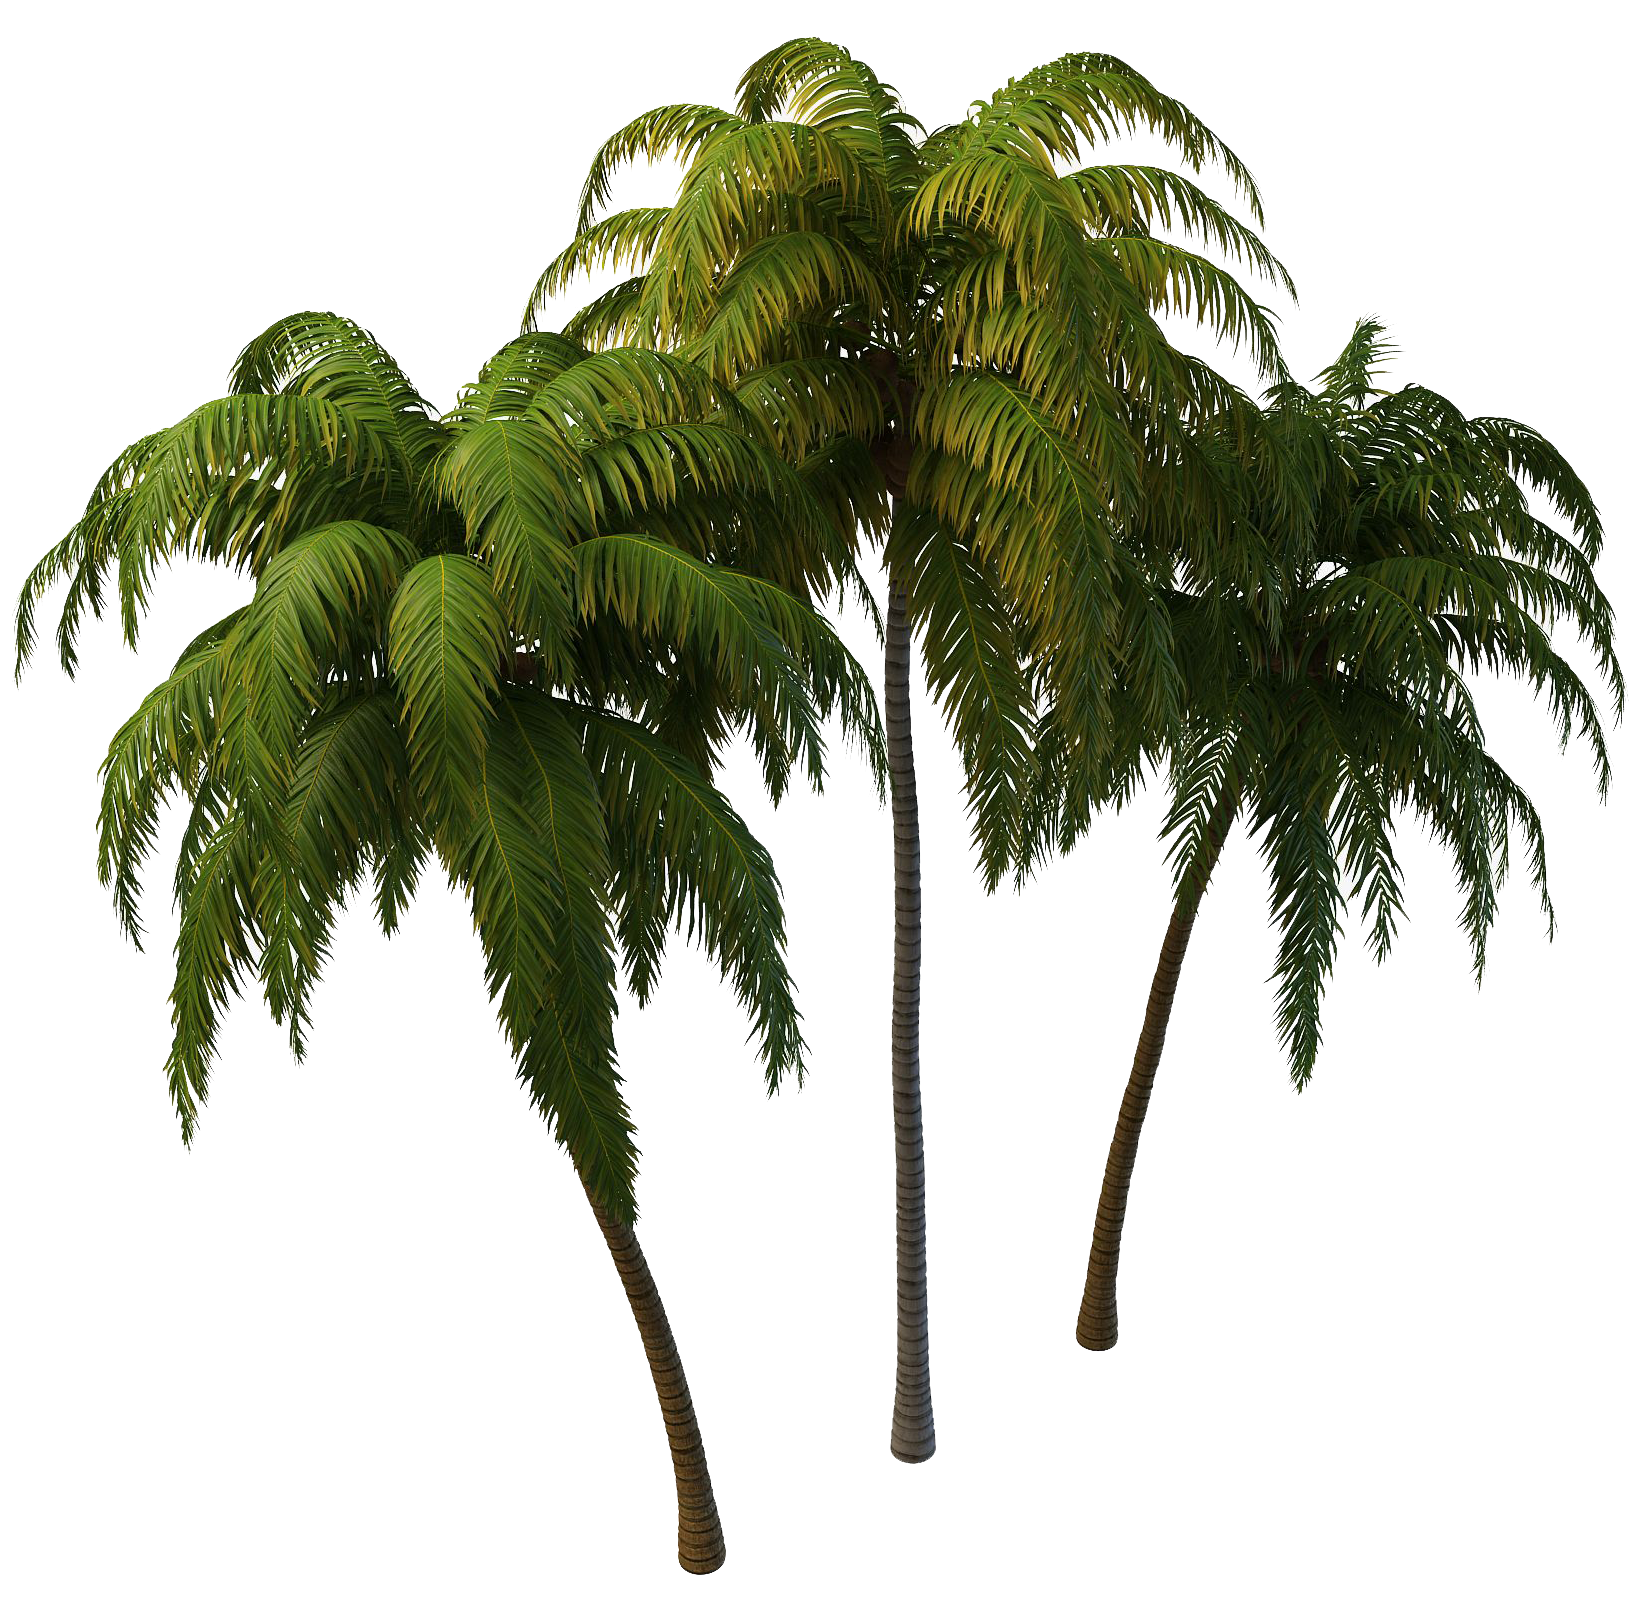 39+ Transparent Background Coconut Tree Vector Png Images